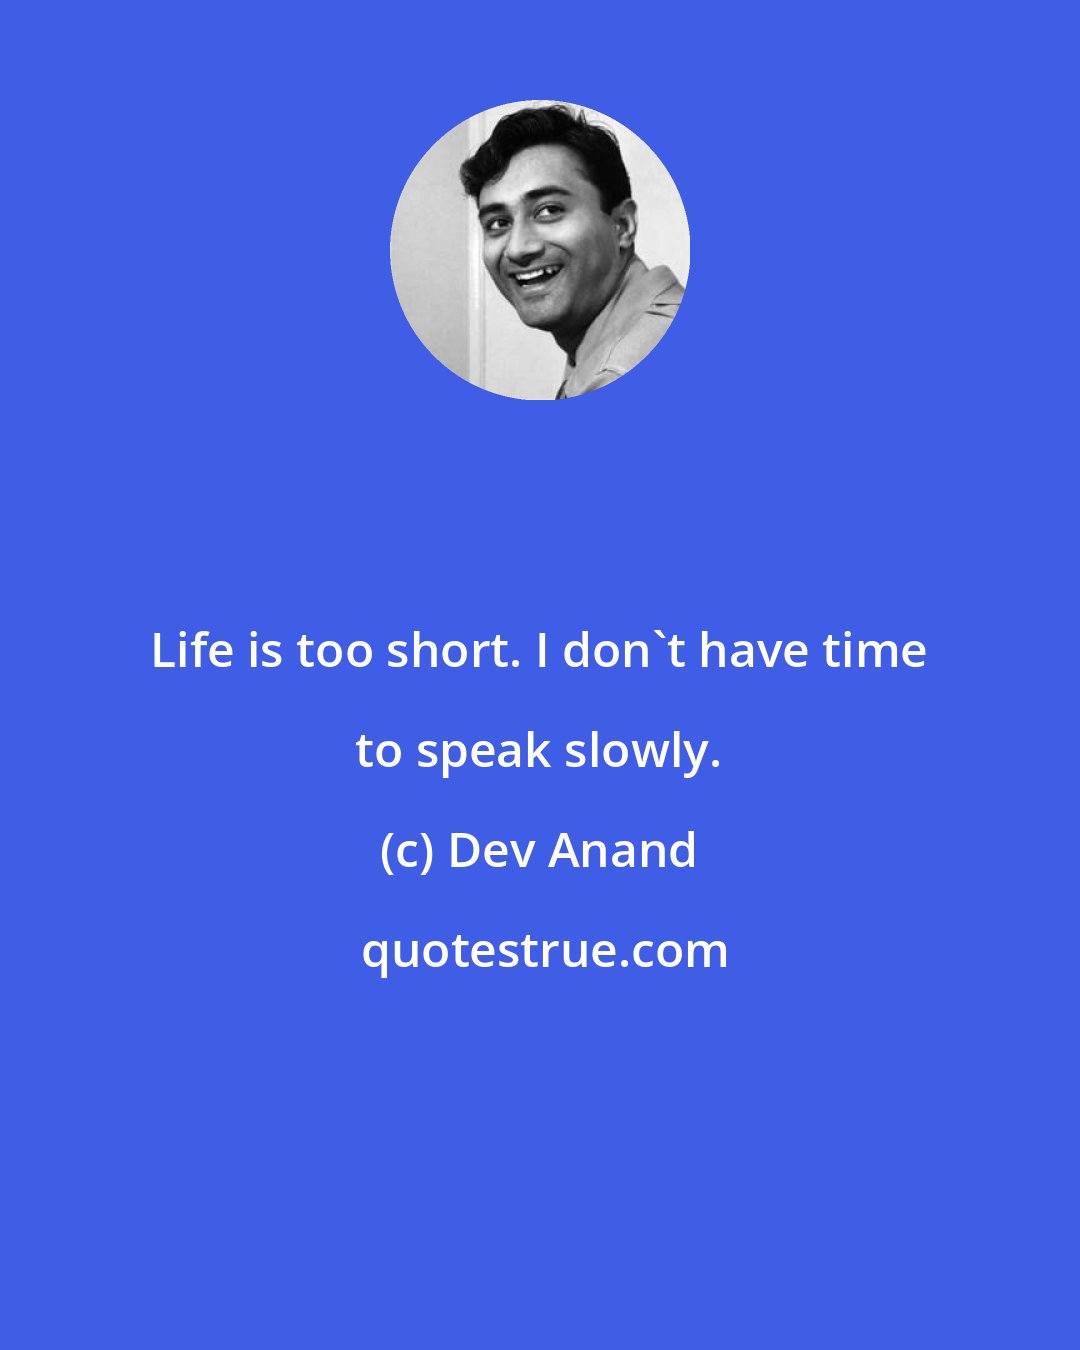 Dev Anand: Life is too short. I don't have time to speak slowly.